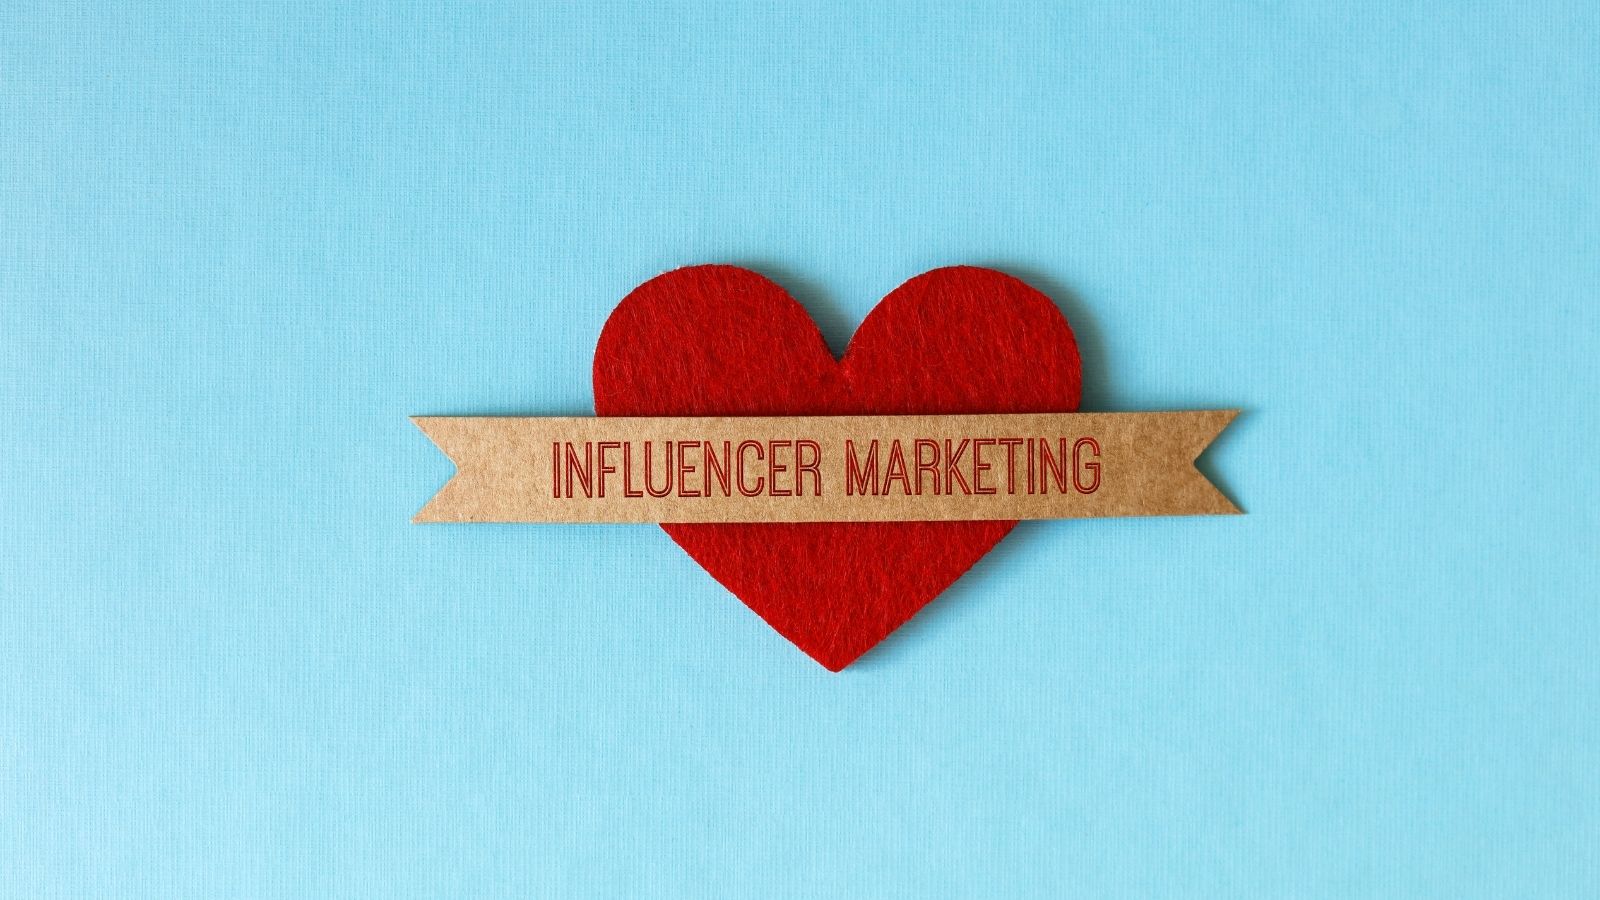 Influencer marketing: Why, when, who?